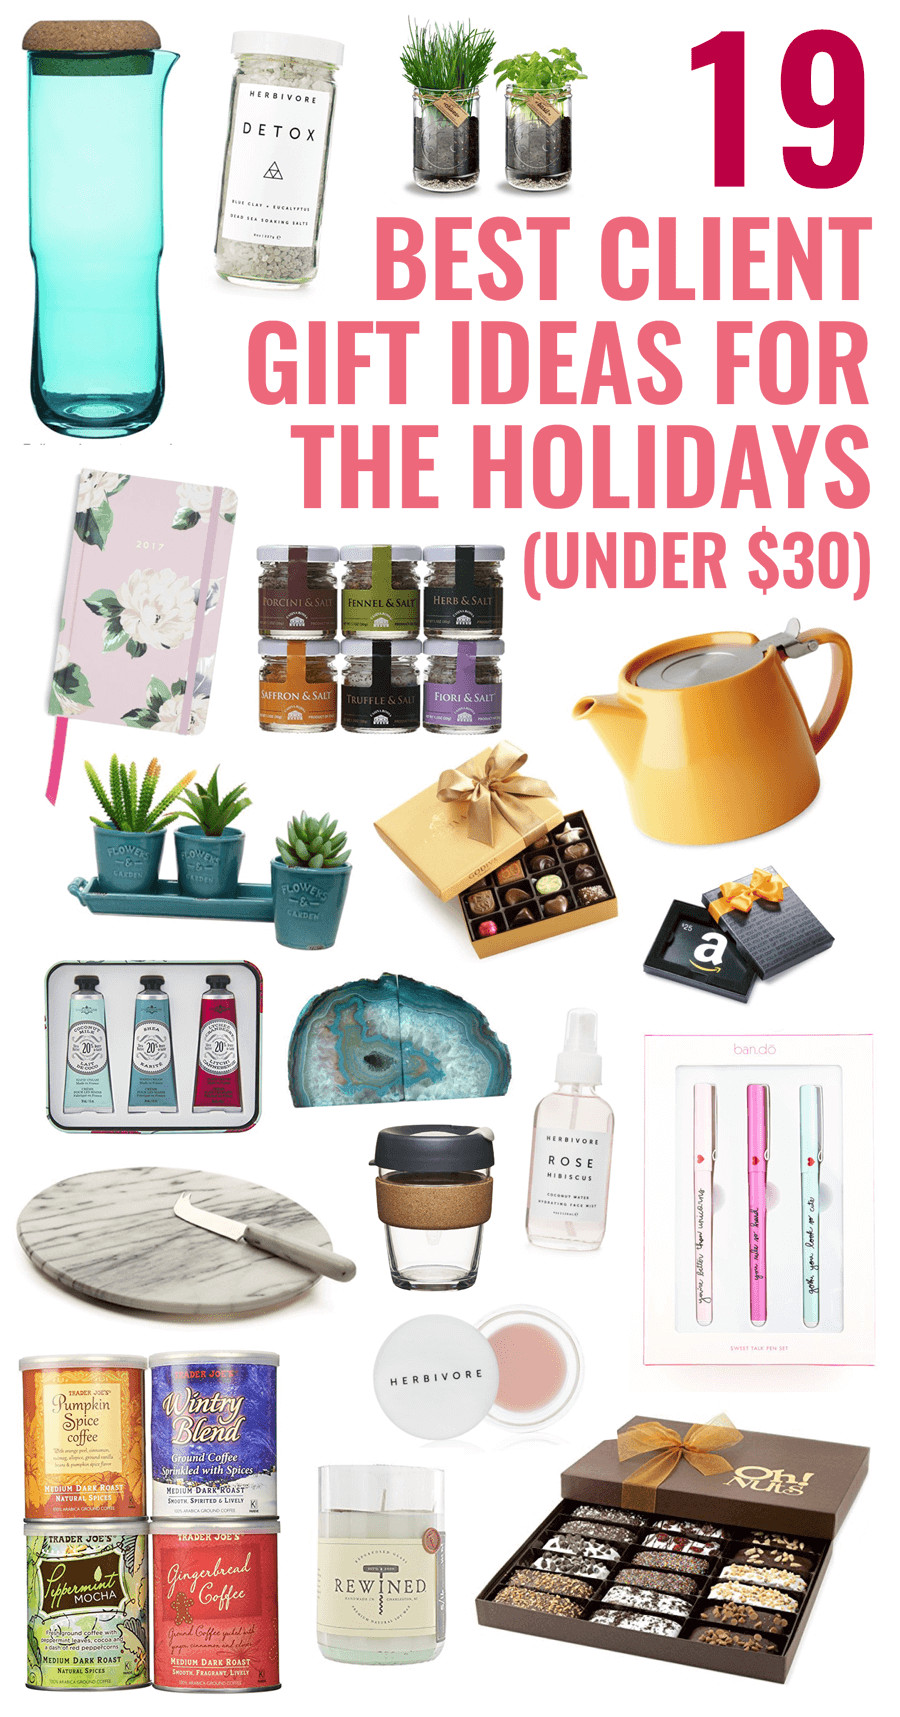 Holiday Client Gift Ideas
 19 Best Client Gift Ideas for the Holidays under $30